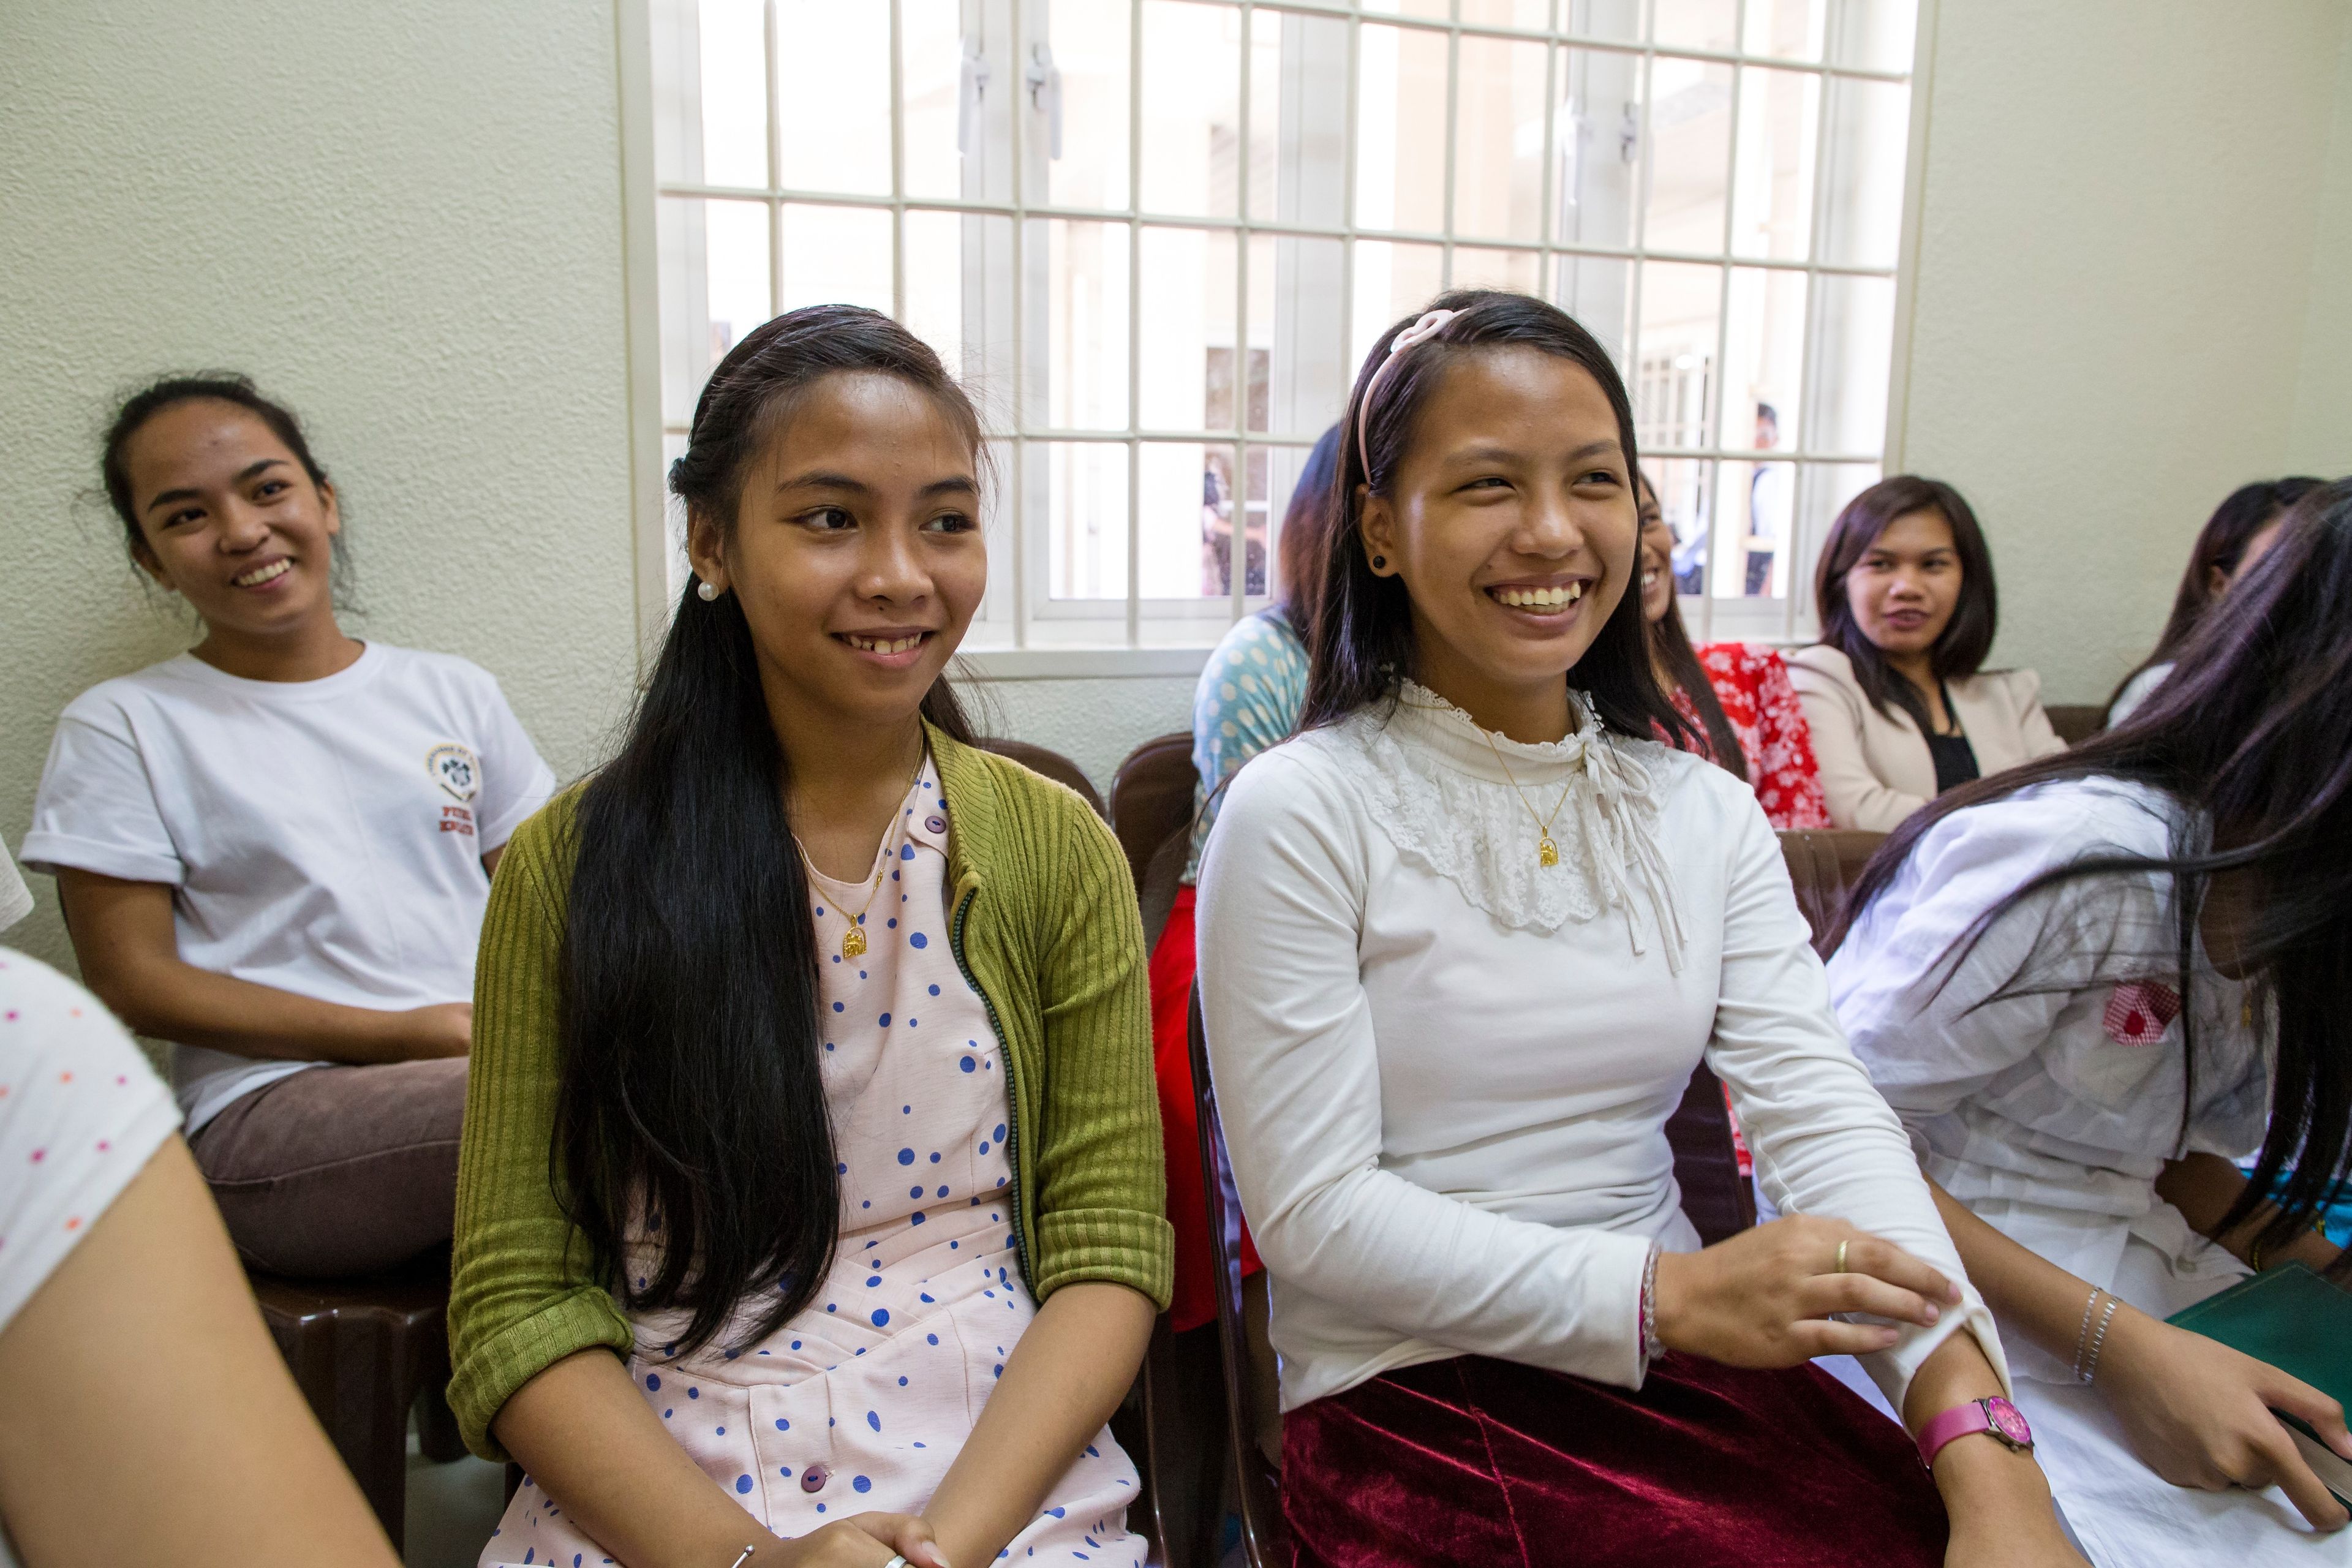 A group of young women in the Philippines sits in class together and smile.  